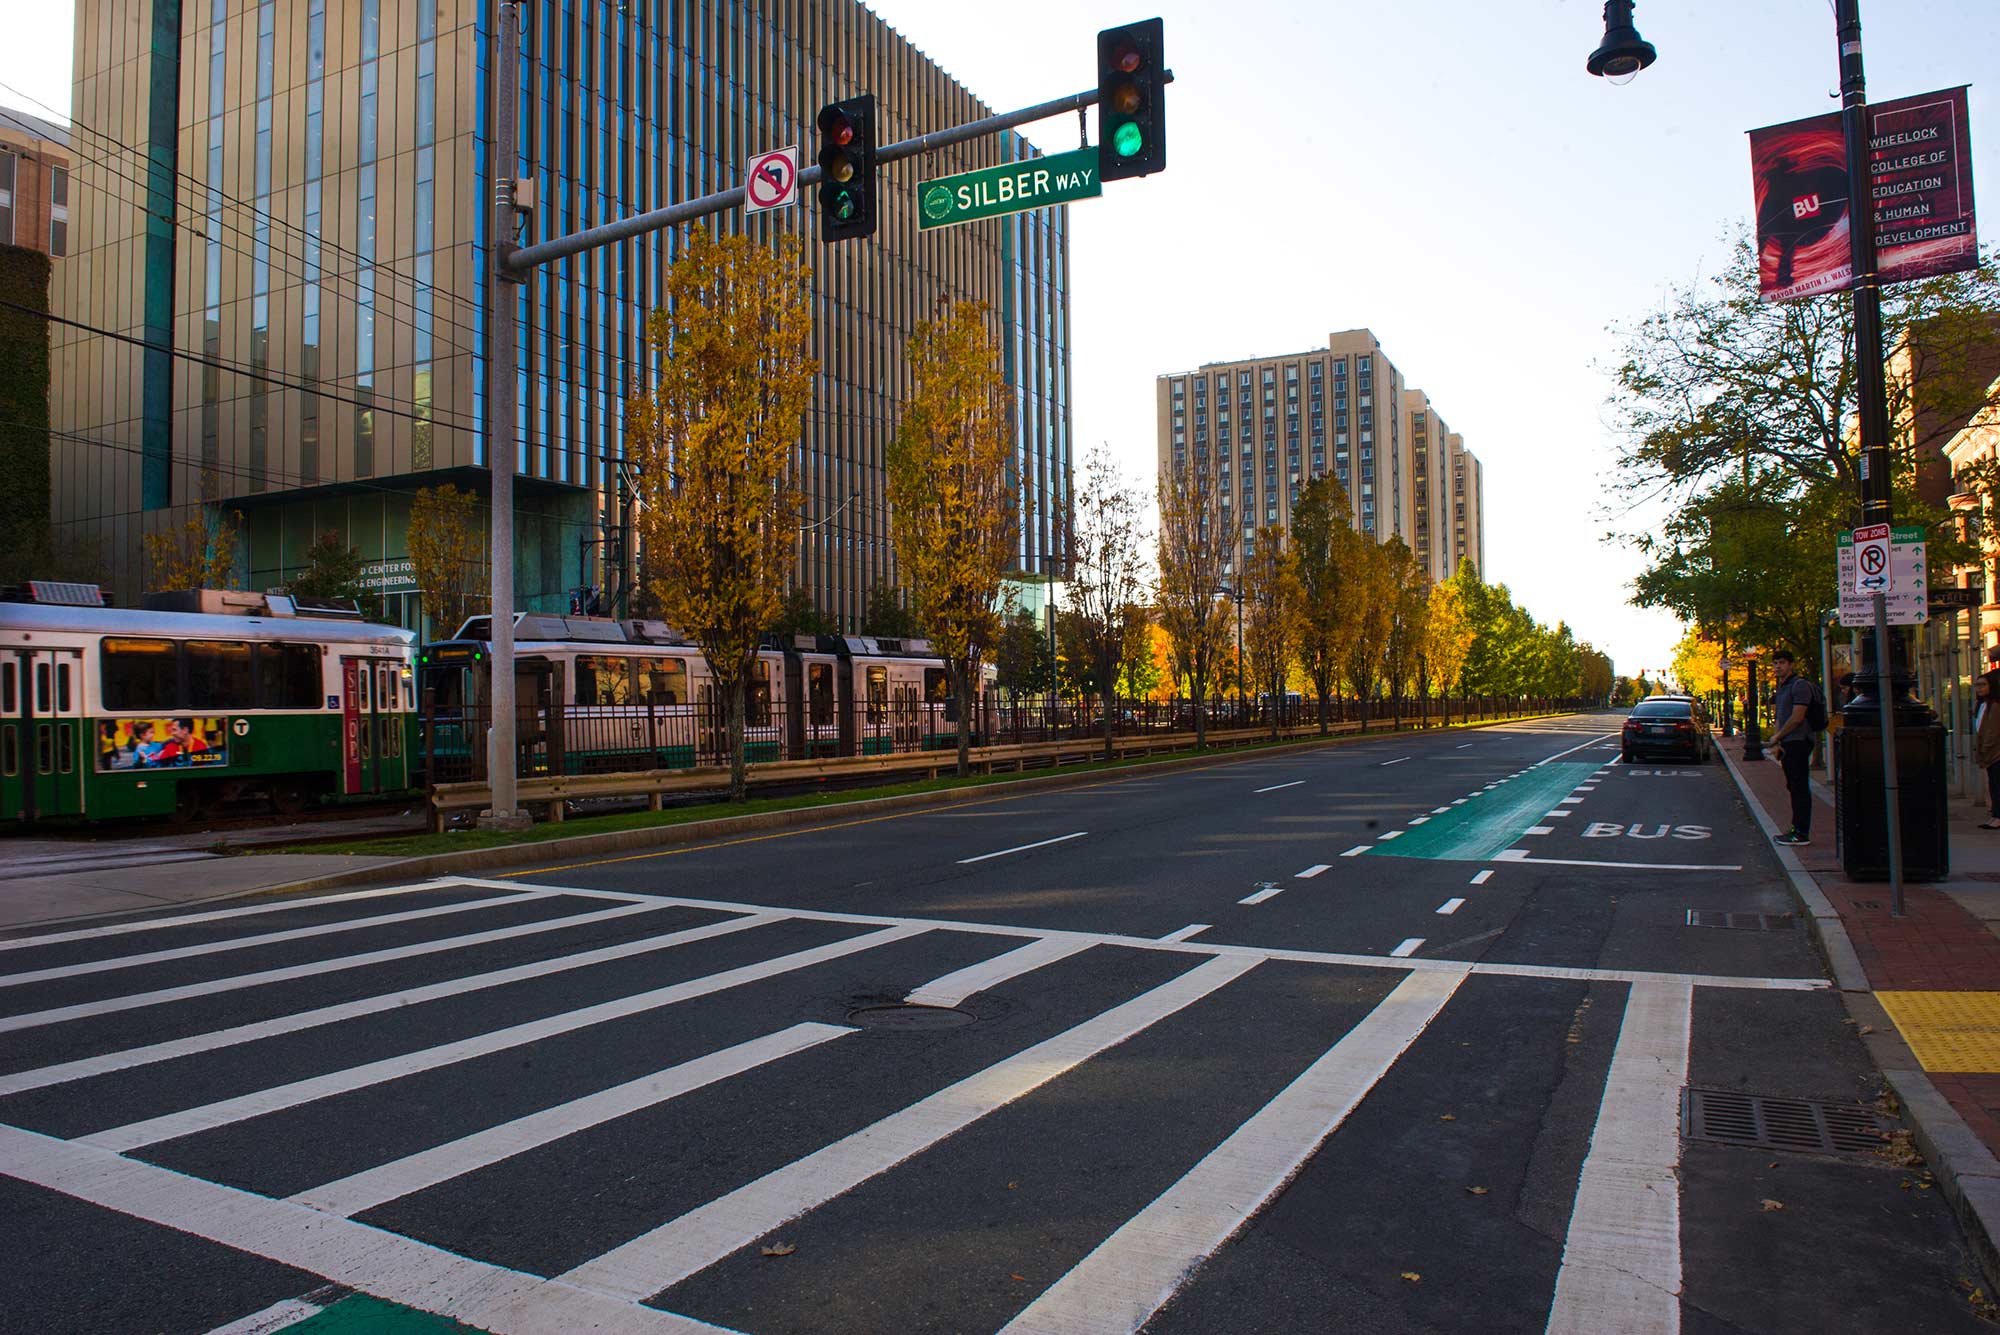 Photo of Commonwealth Avenue in East Campus by Silber Way. The T passes by and the trees look golden. Students wait at the BU BUS stop. Warren towers and Wheelock College banners are seen in the background.